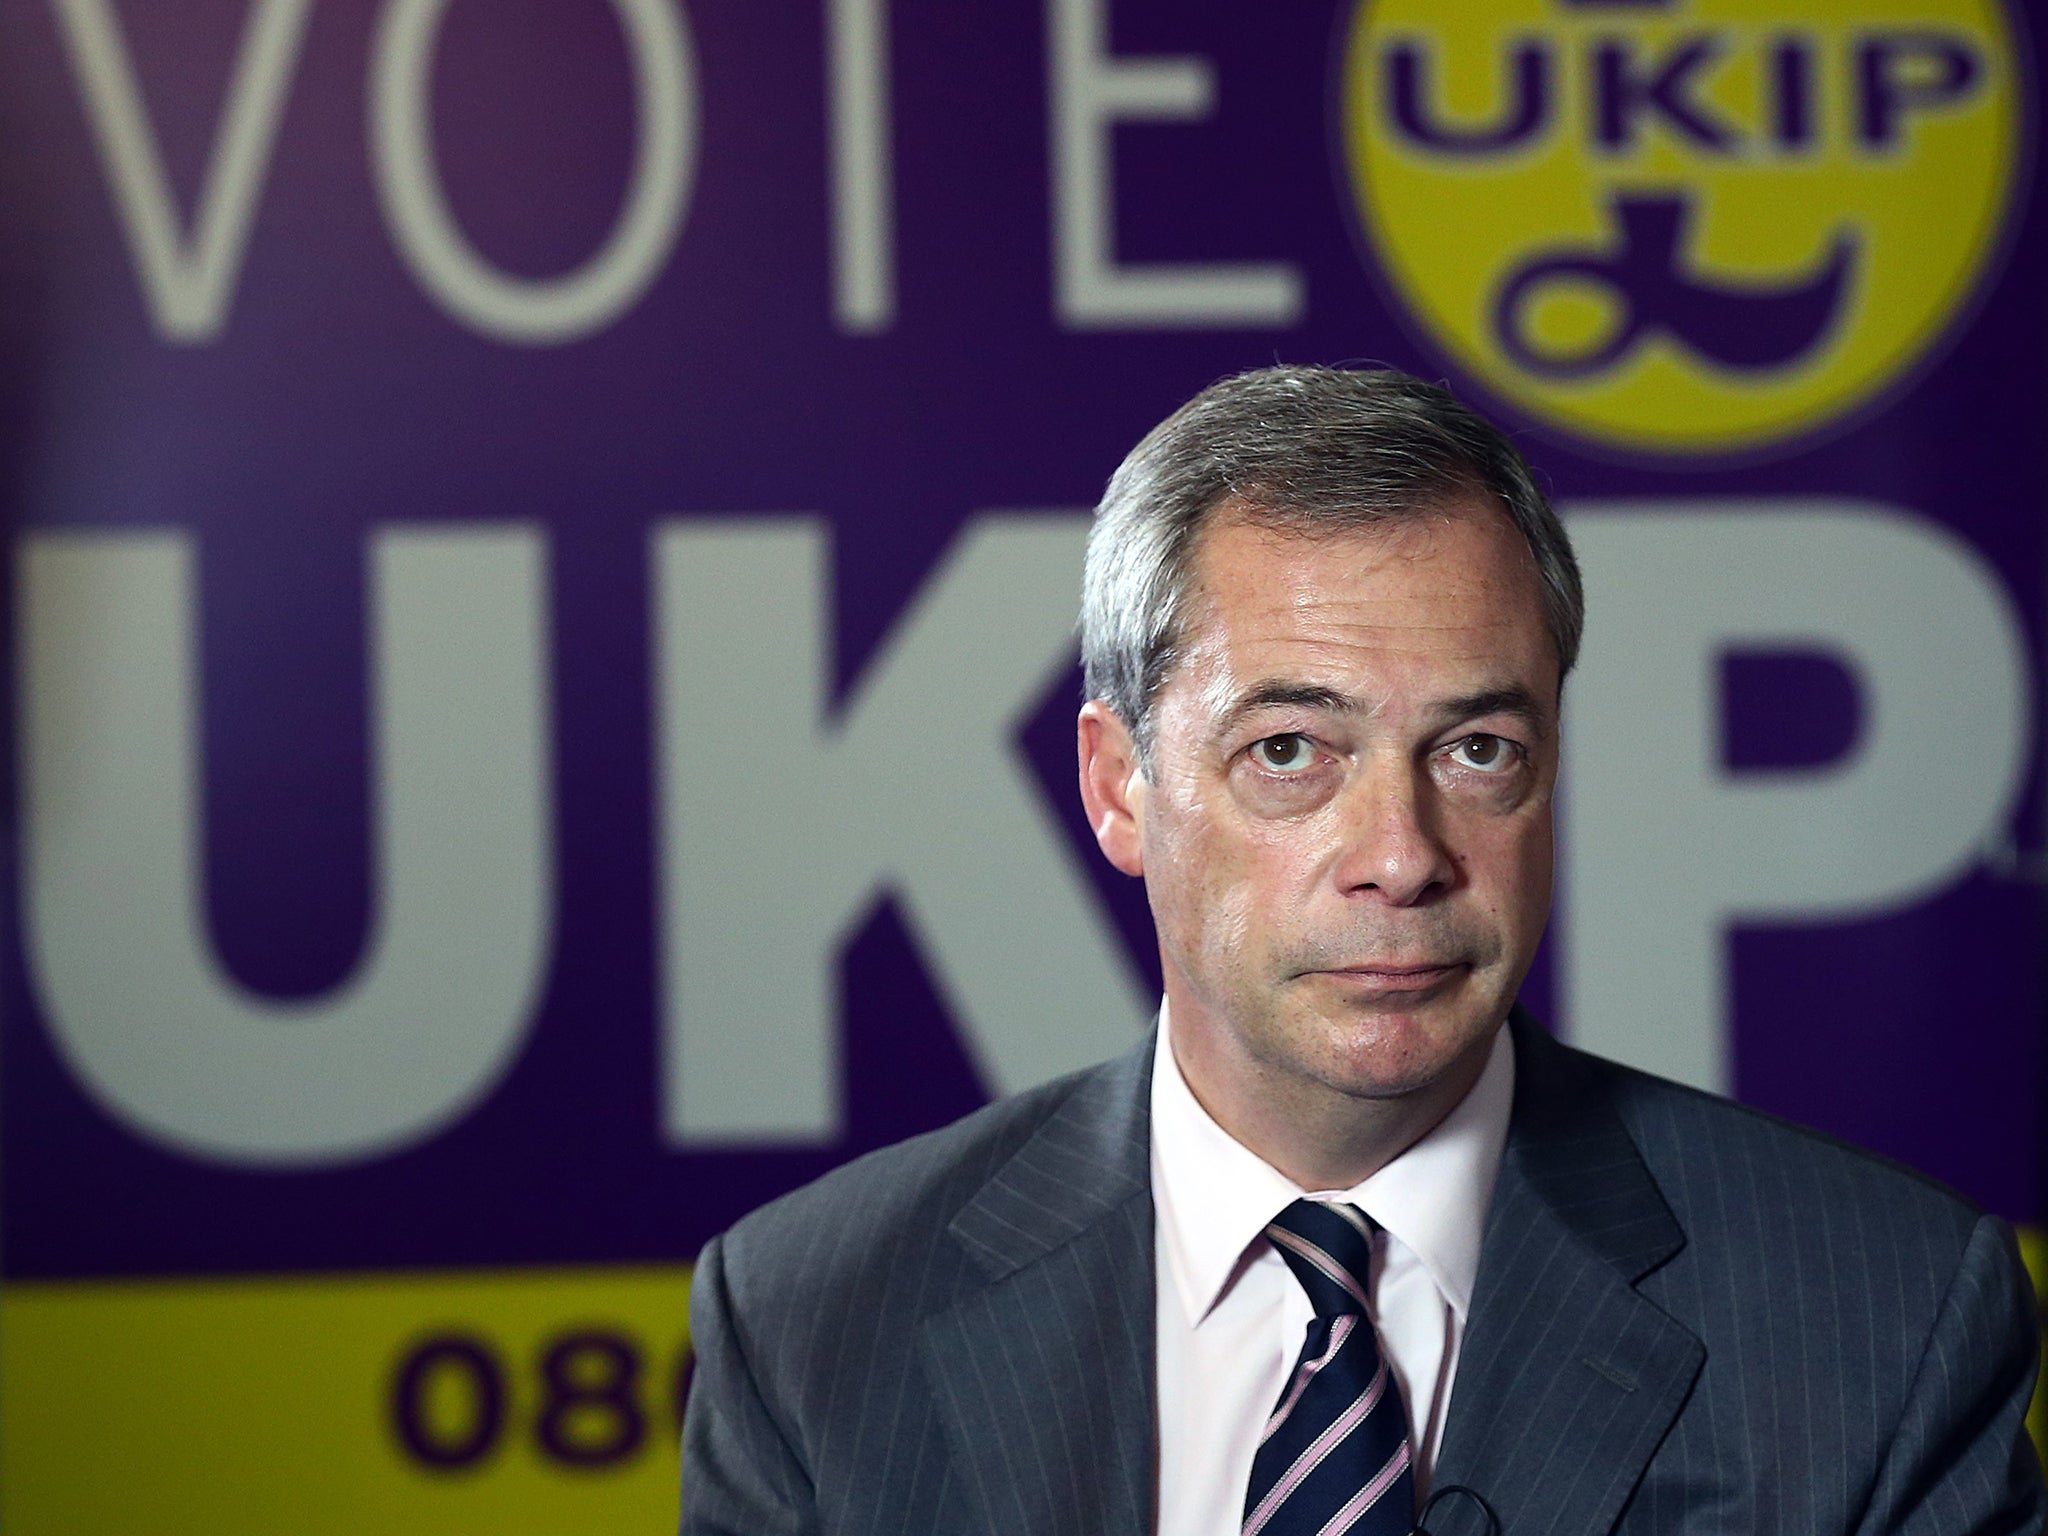 Nigel Farage said the atrocity was the result of “having a fifth column” in Western countries